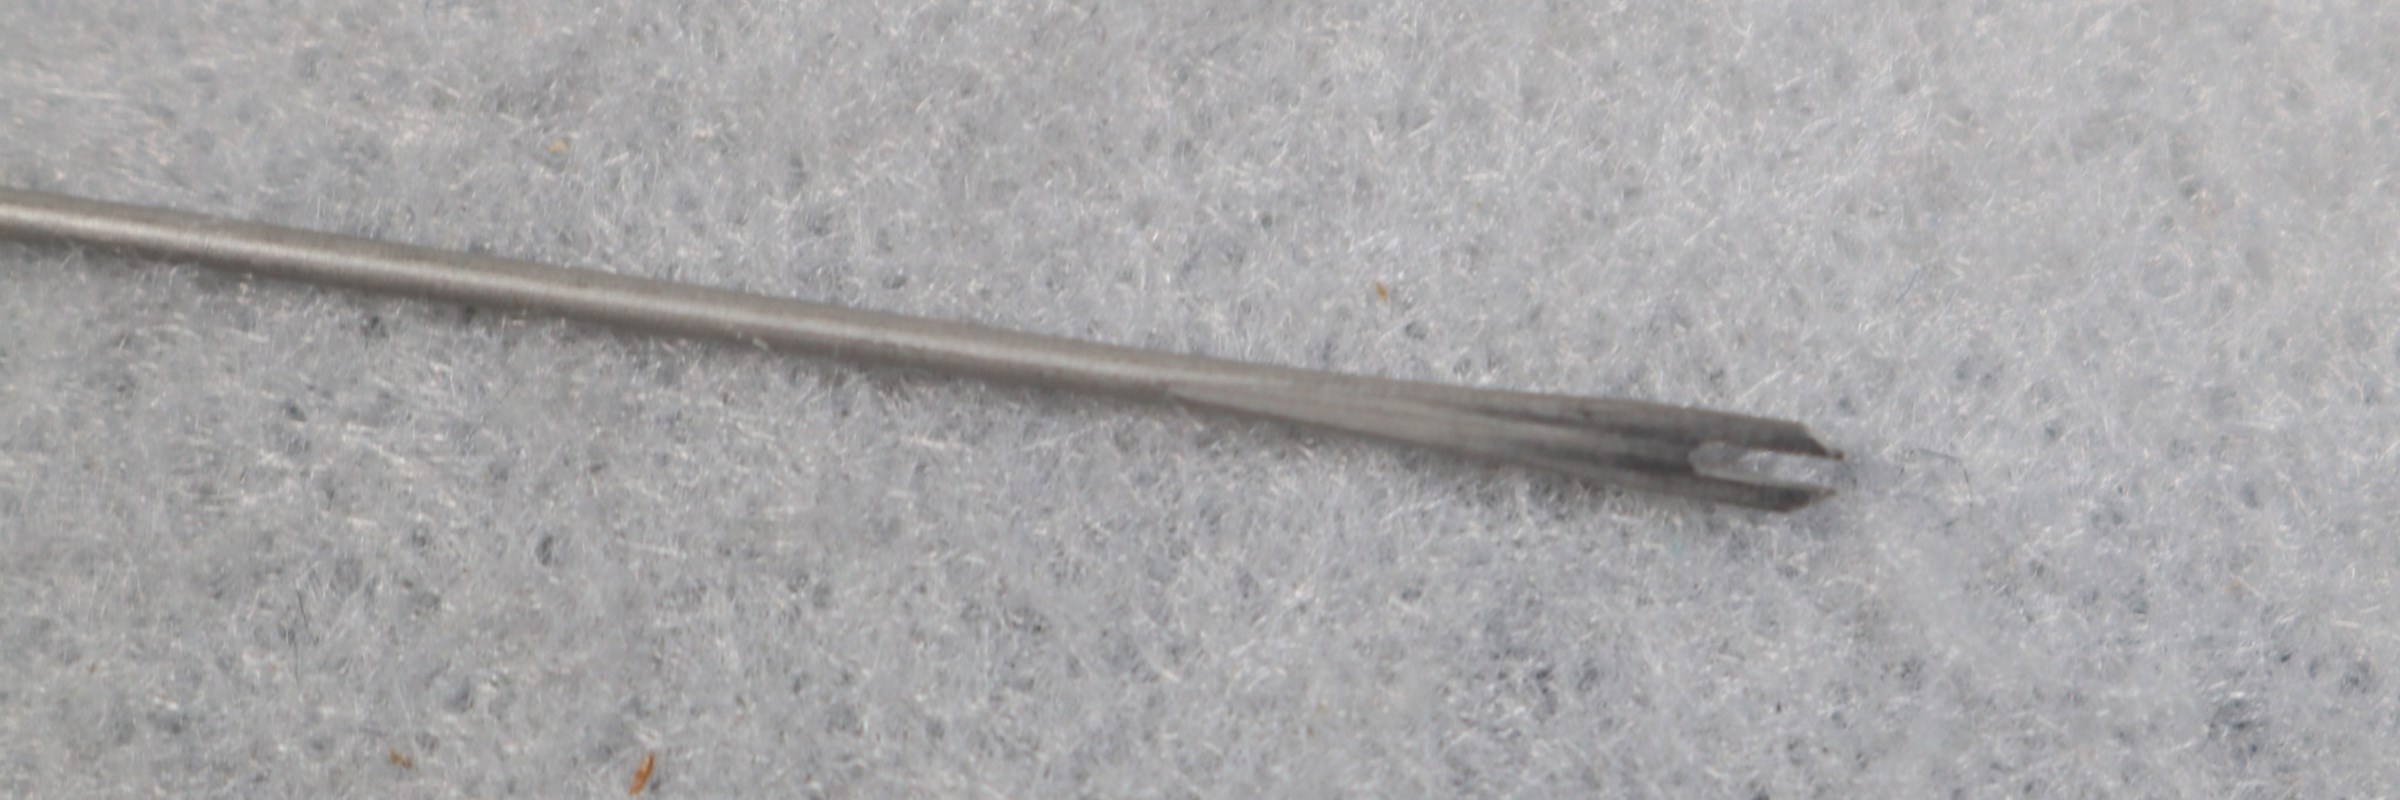 Learn about the Bifurcated Needle